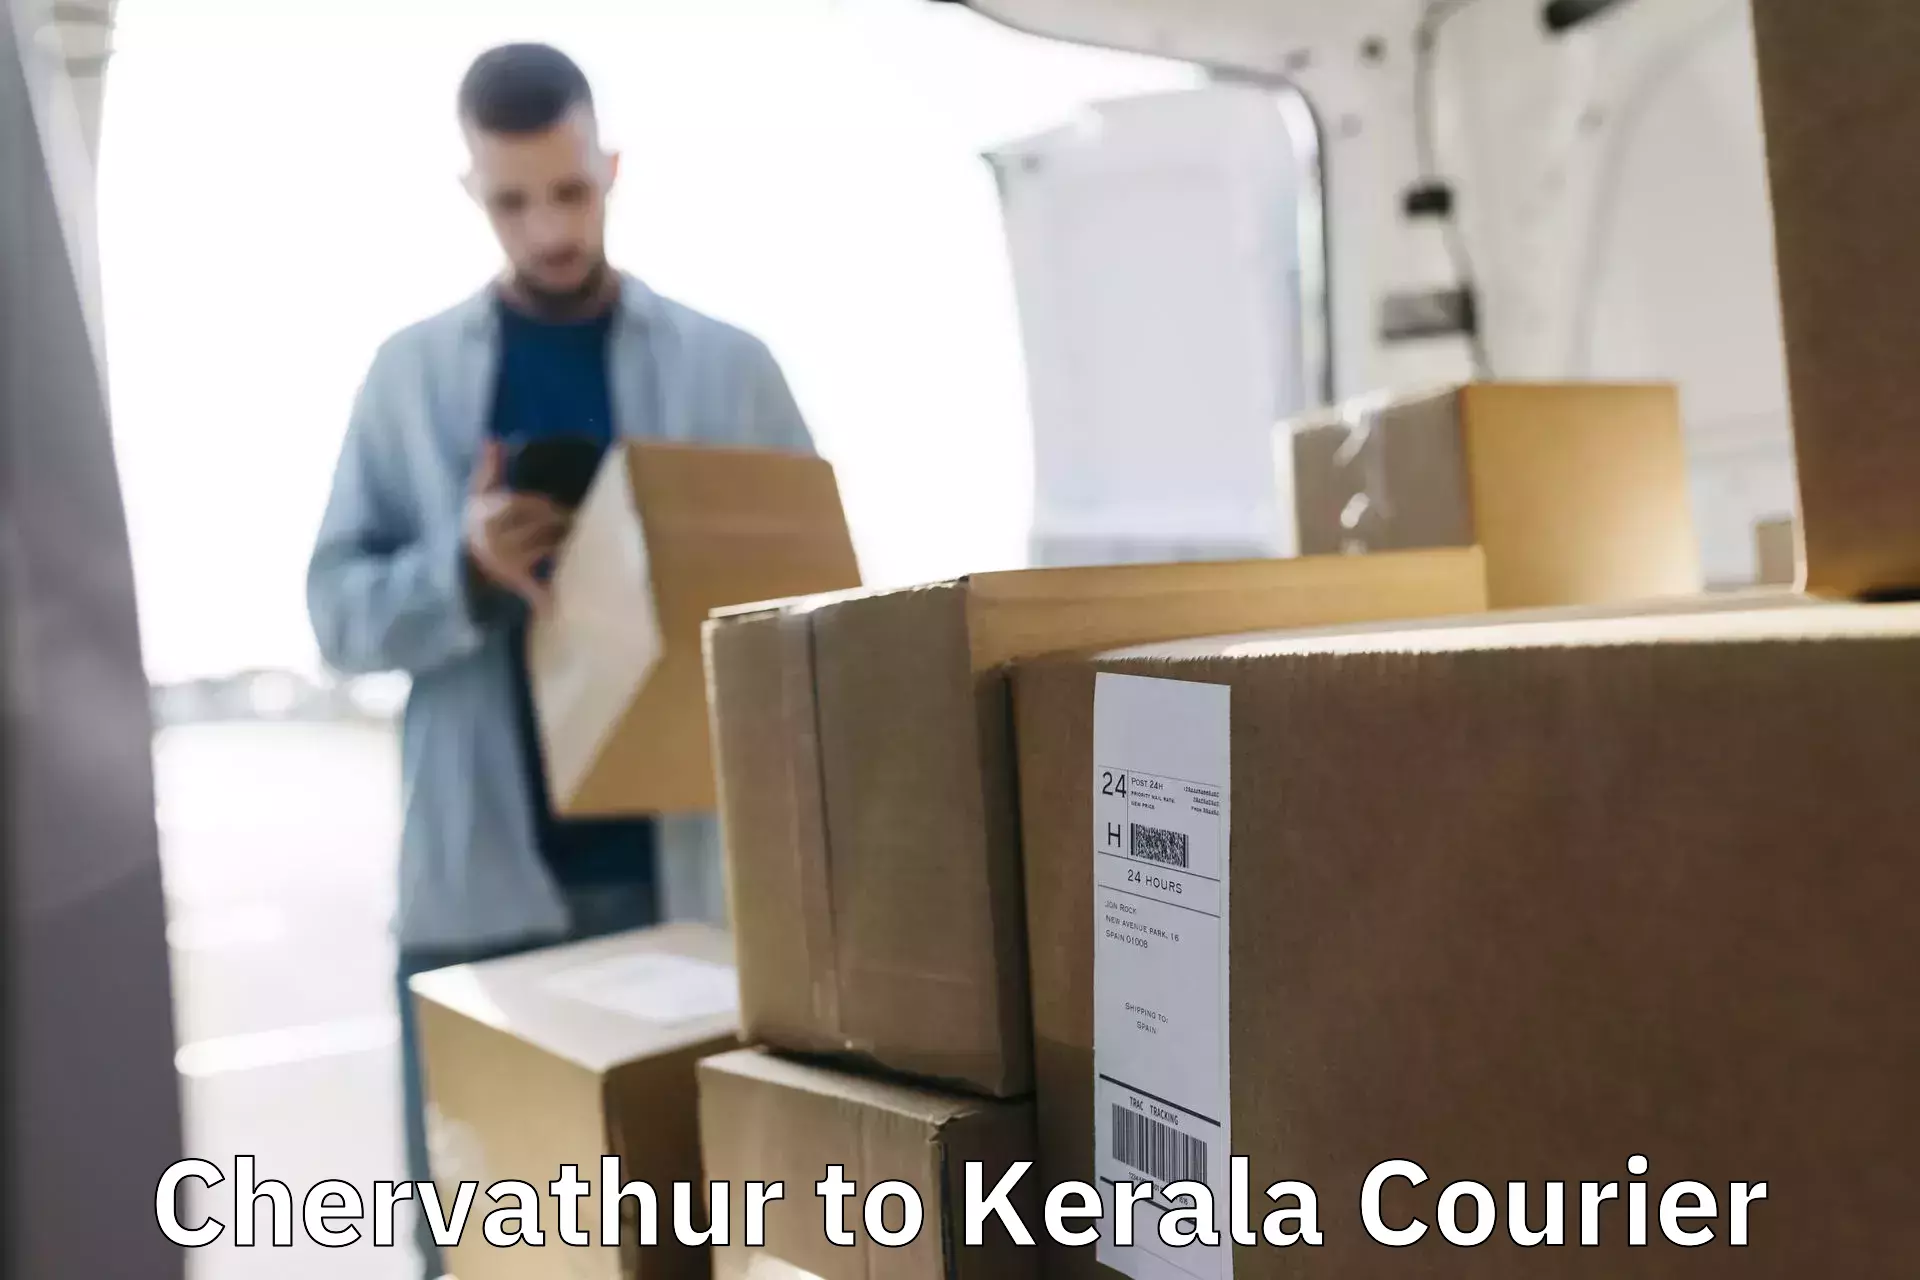 Reliable freight solutions Chervathur to Mananthavady